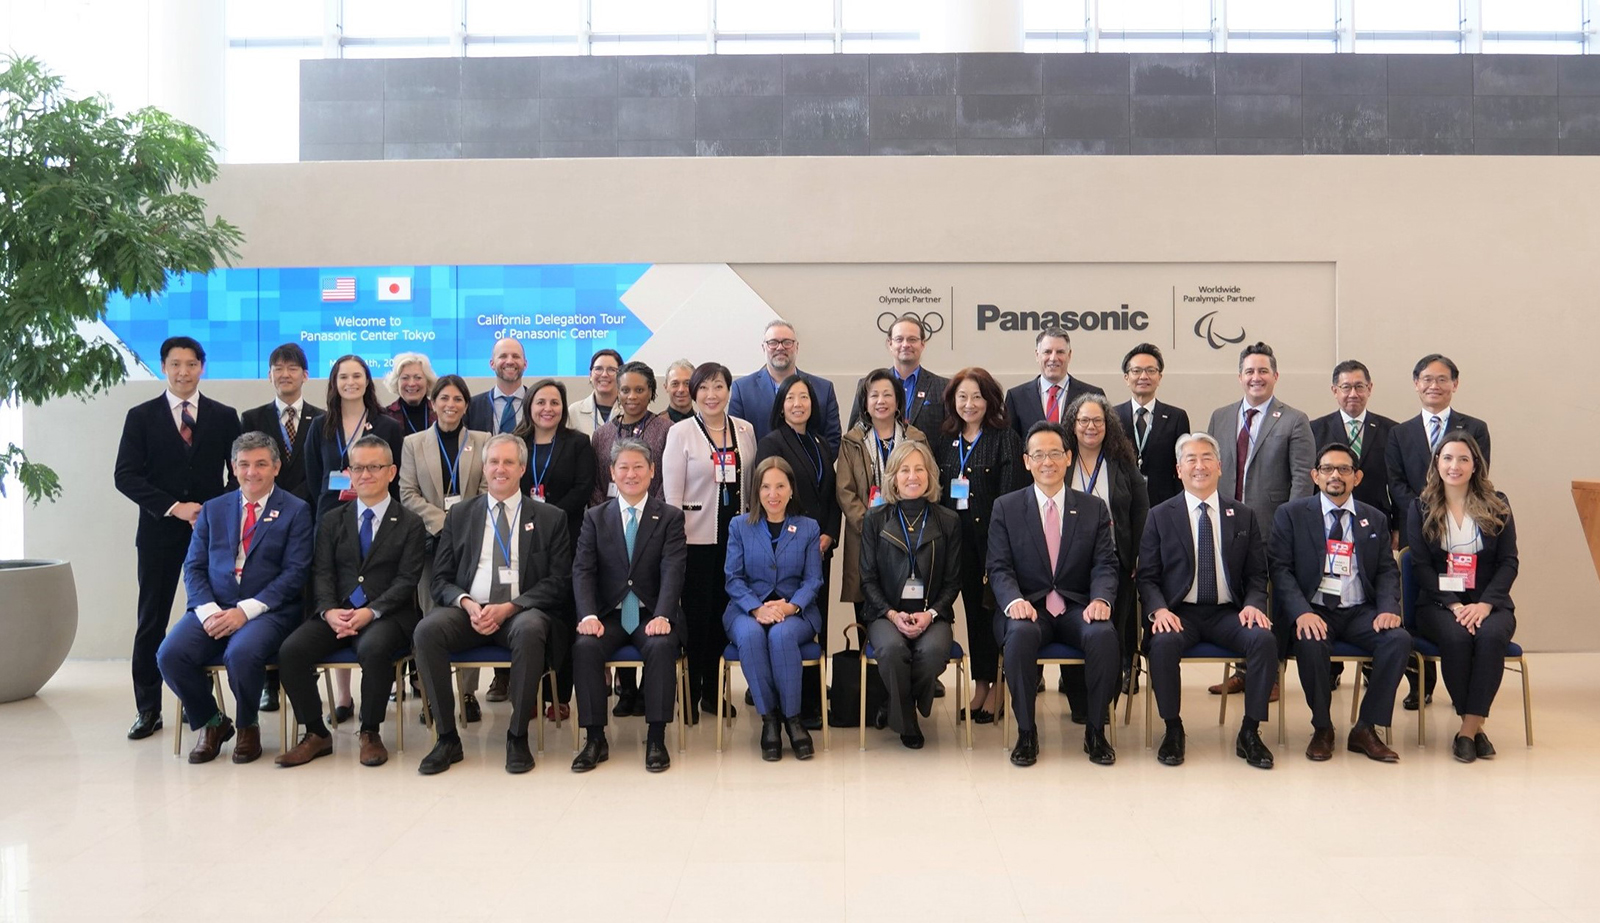 Photo: Lieutenant Governor Eleni Kounalakis and a delegation of 40 California government officials and other concerned parties at Panasonic Center Tokyo